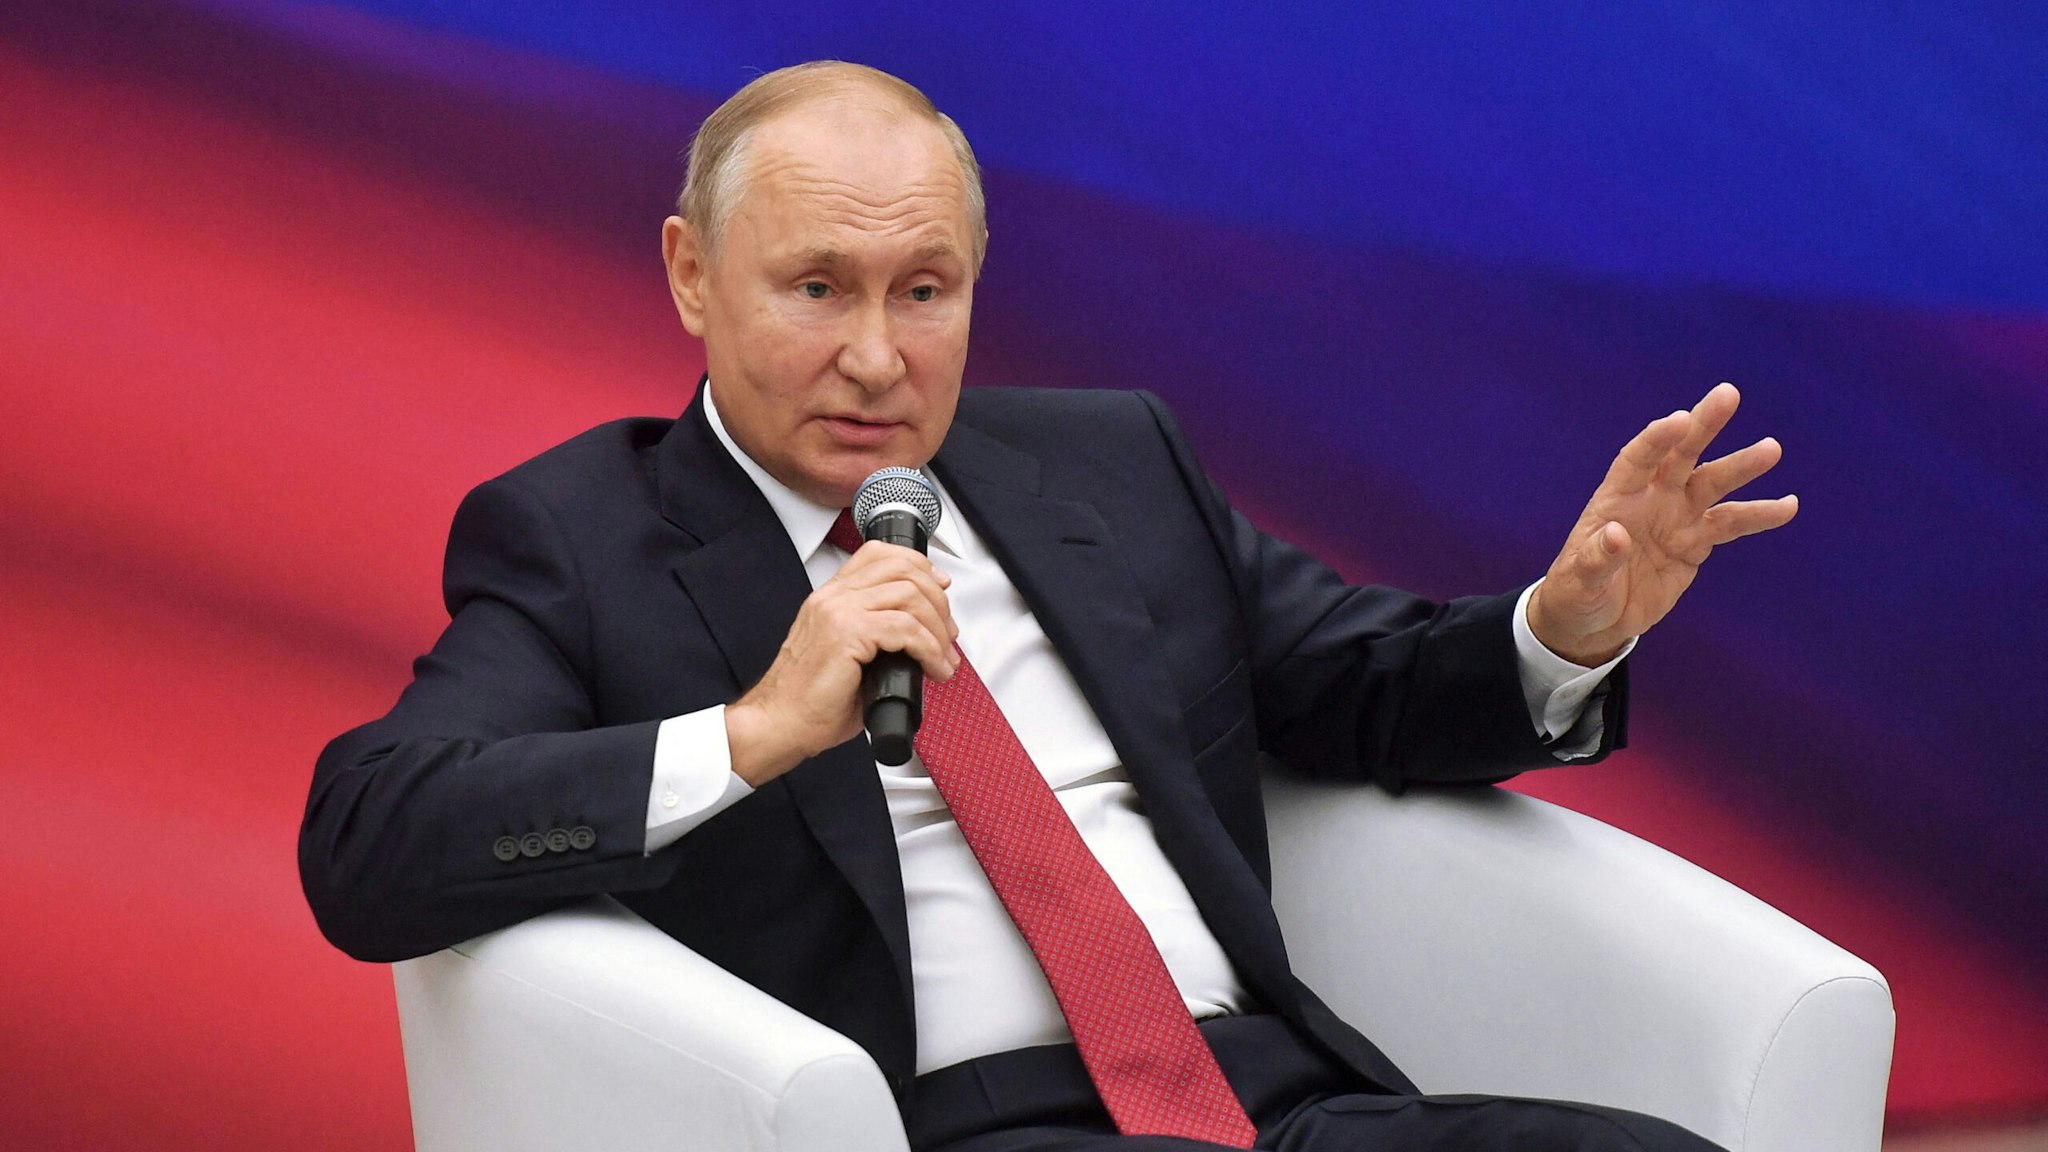 Russia's President Vladimir Putin speaks during a United Russia ruling party's members meeting in Moscow on August 22, 2021.